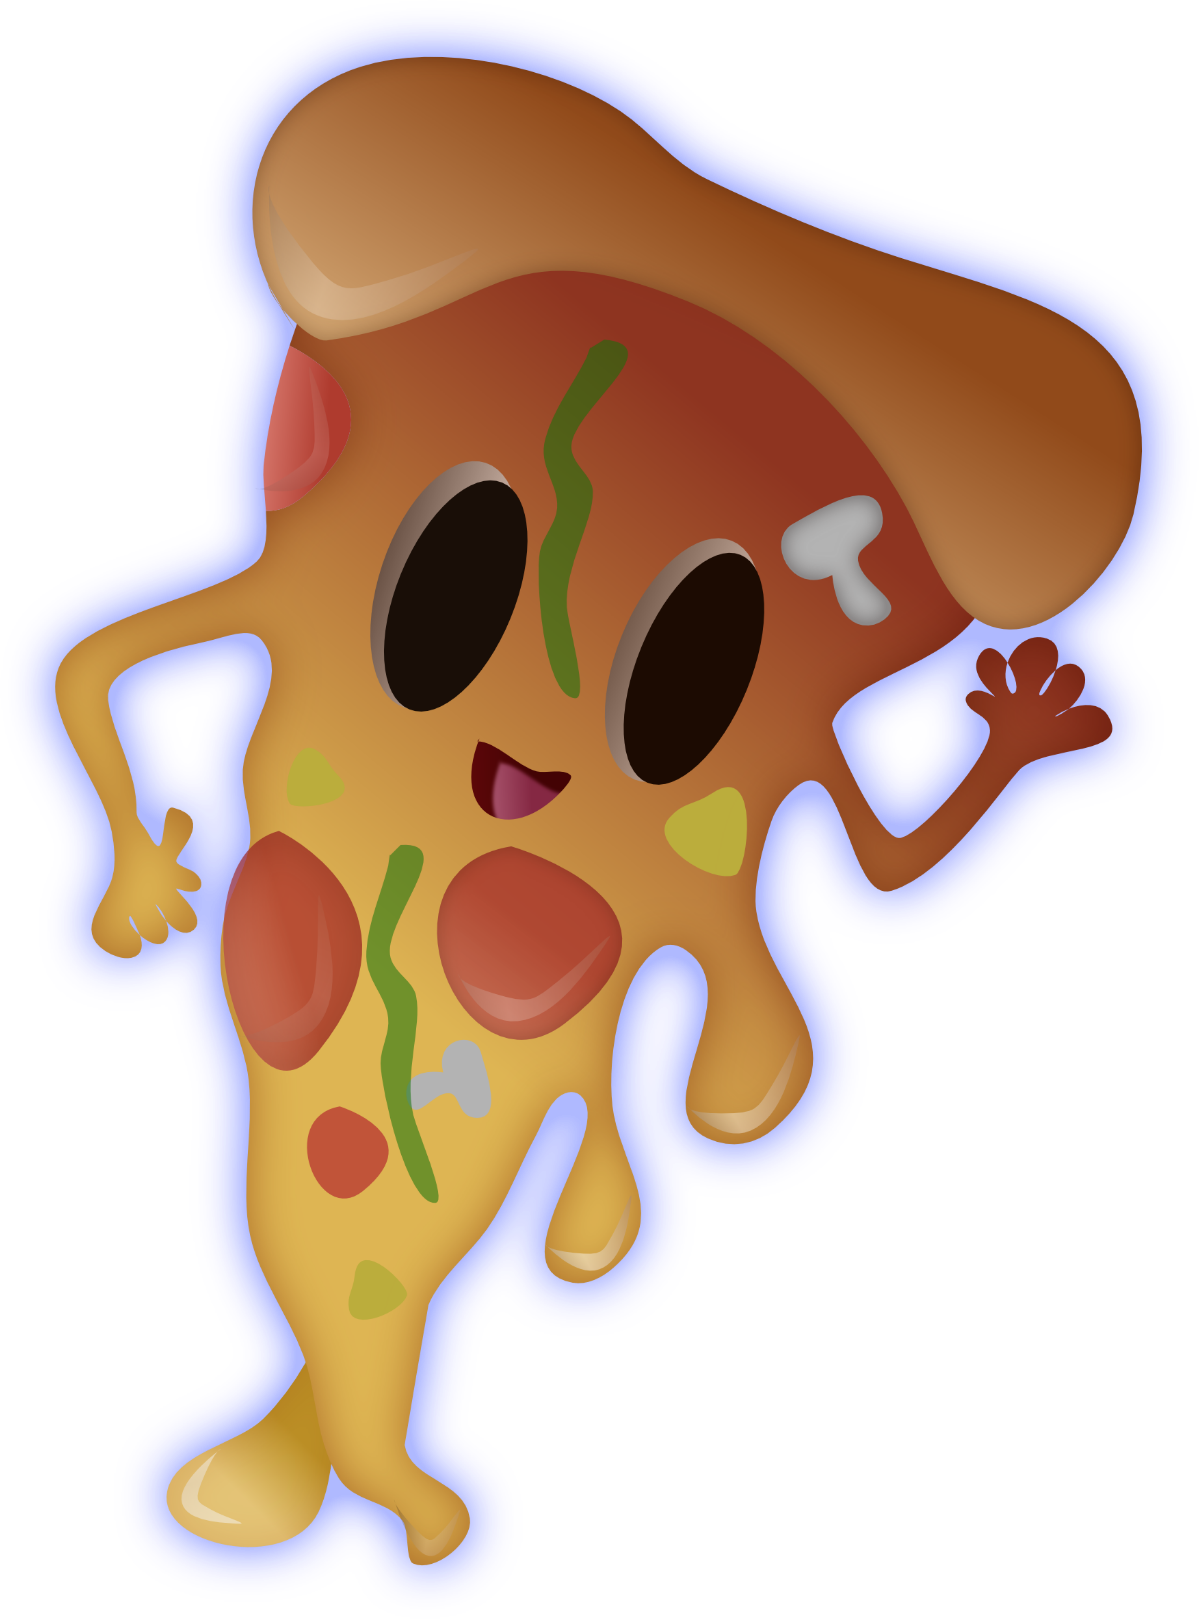 Dancing big image png. People clipart pizza